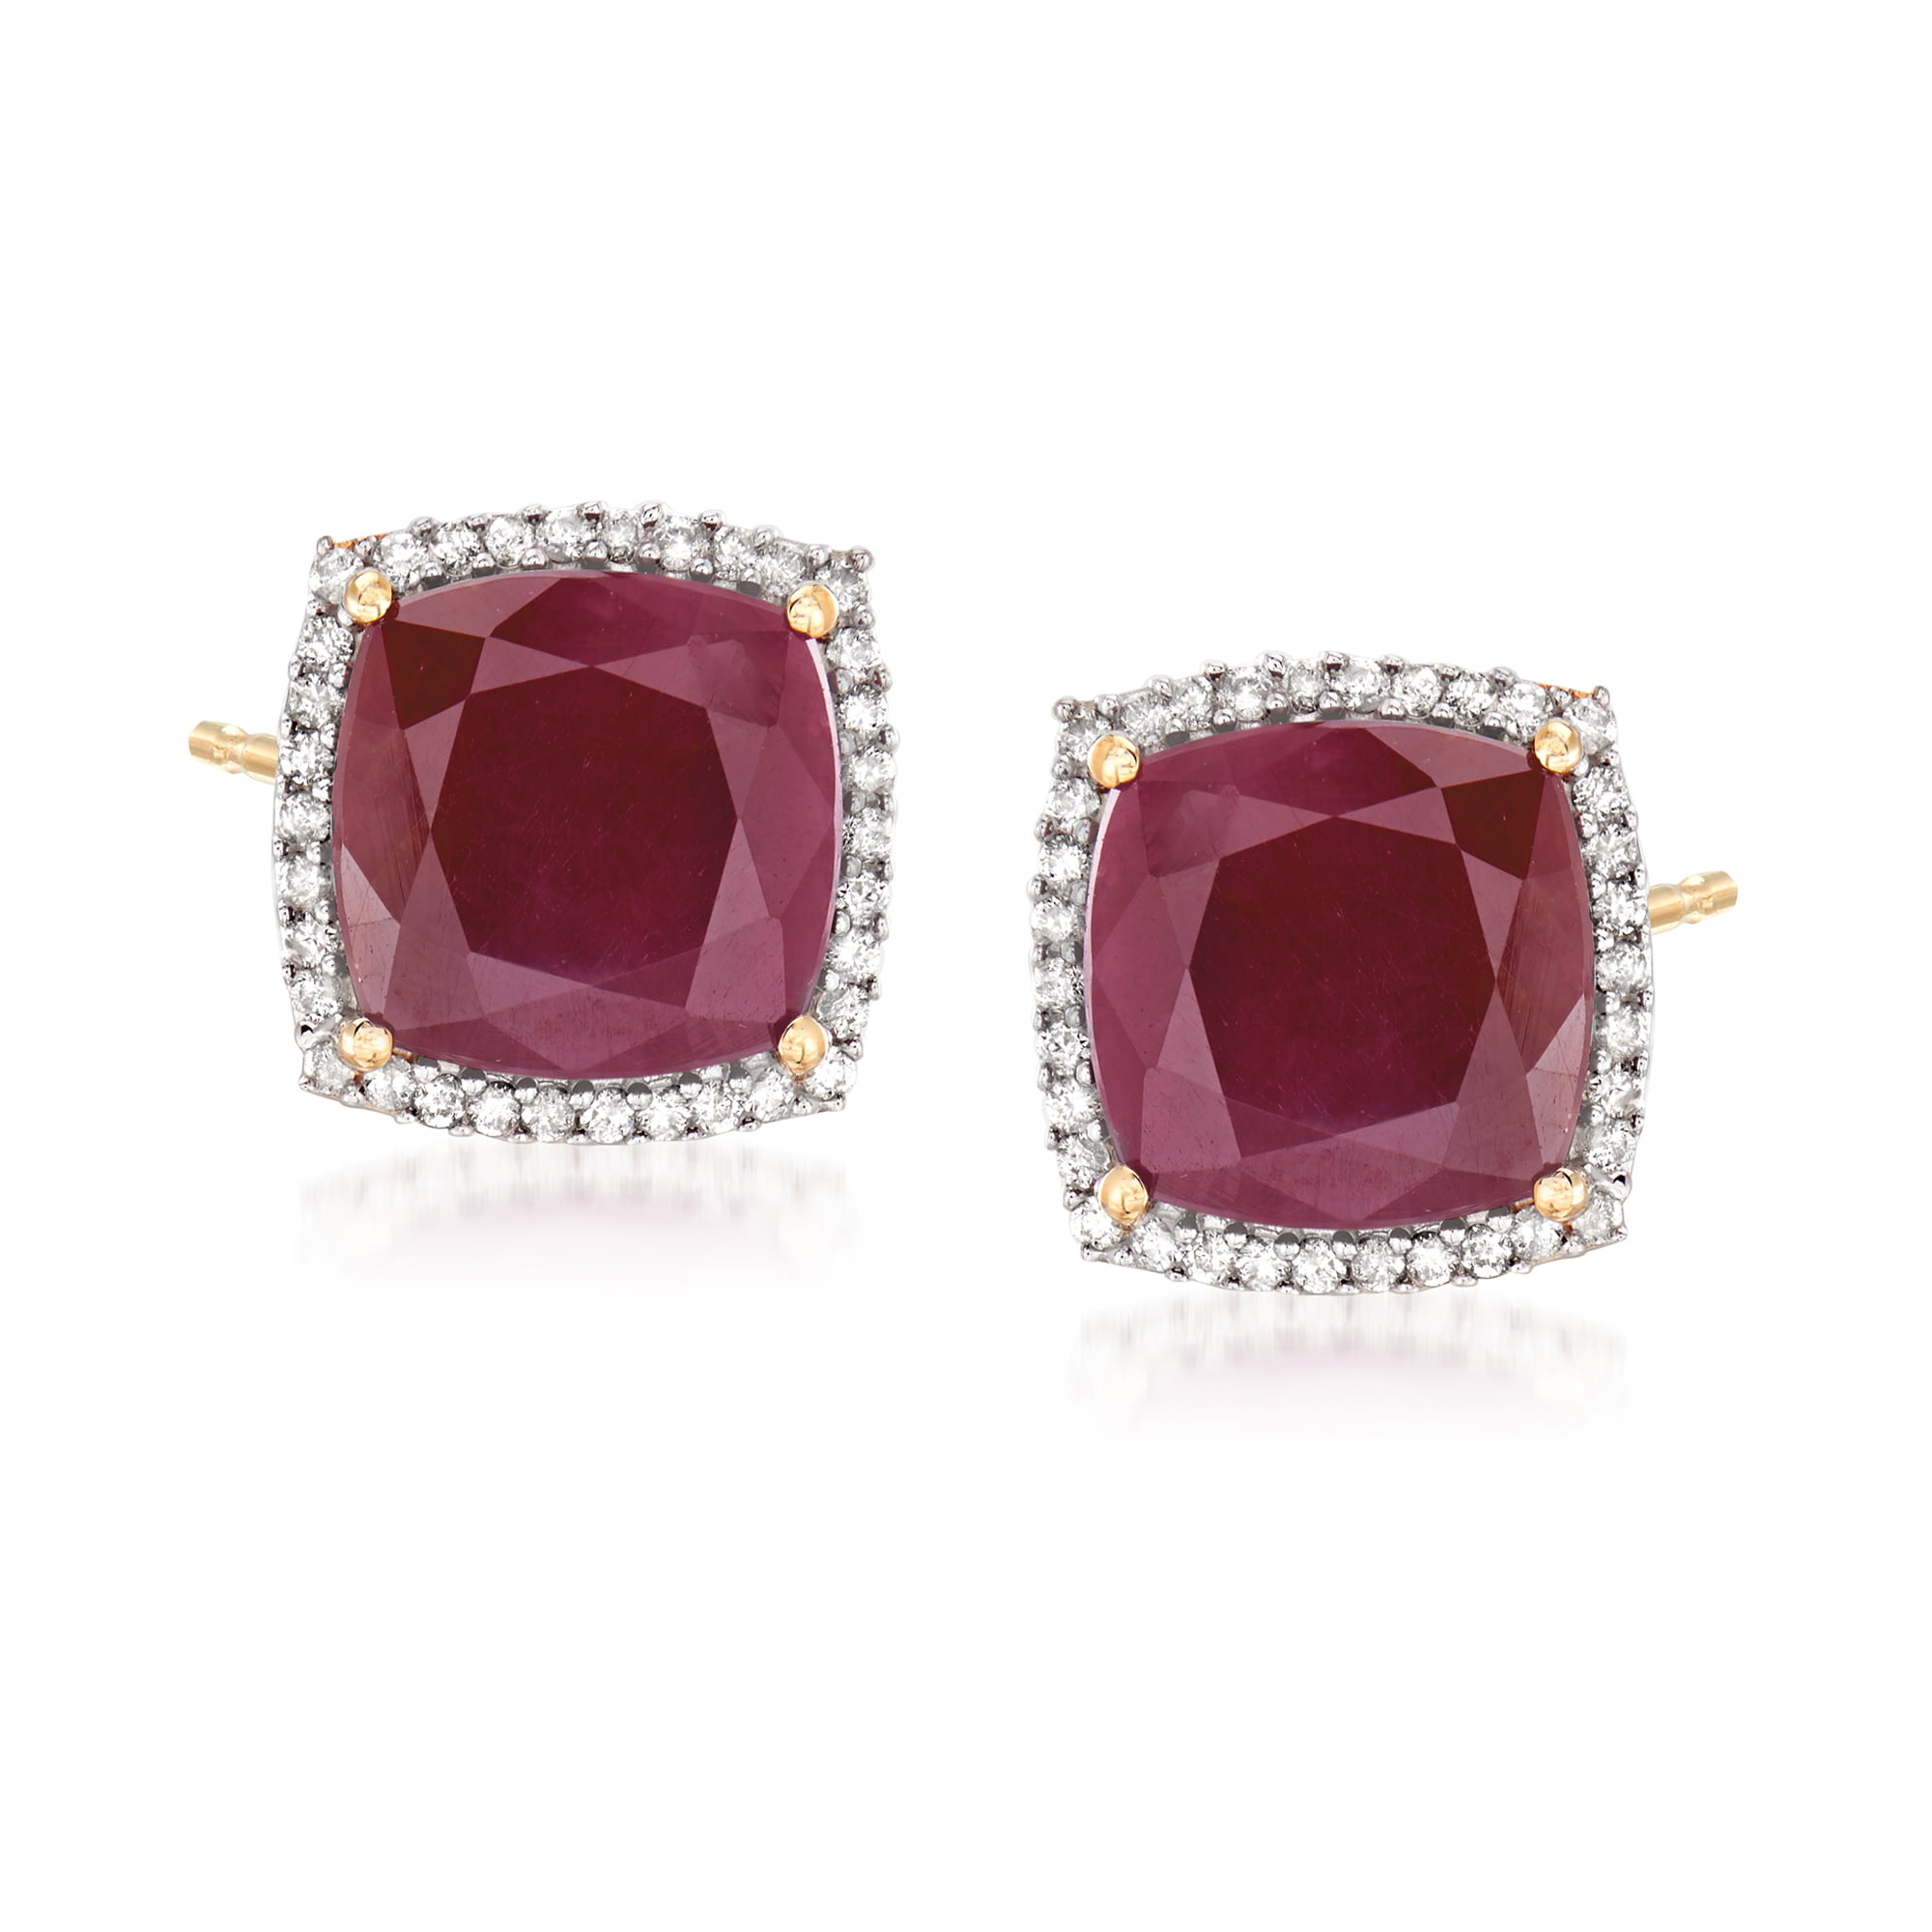 Ross-Simons 7.60 ct. t.w. Ruby and .23 ct. t.w. Diamond Stud Earrings in  14kt Yellow Gold